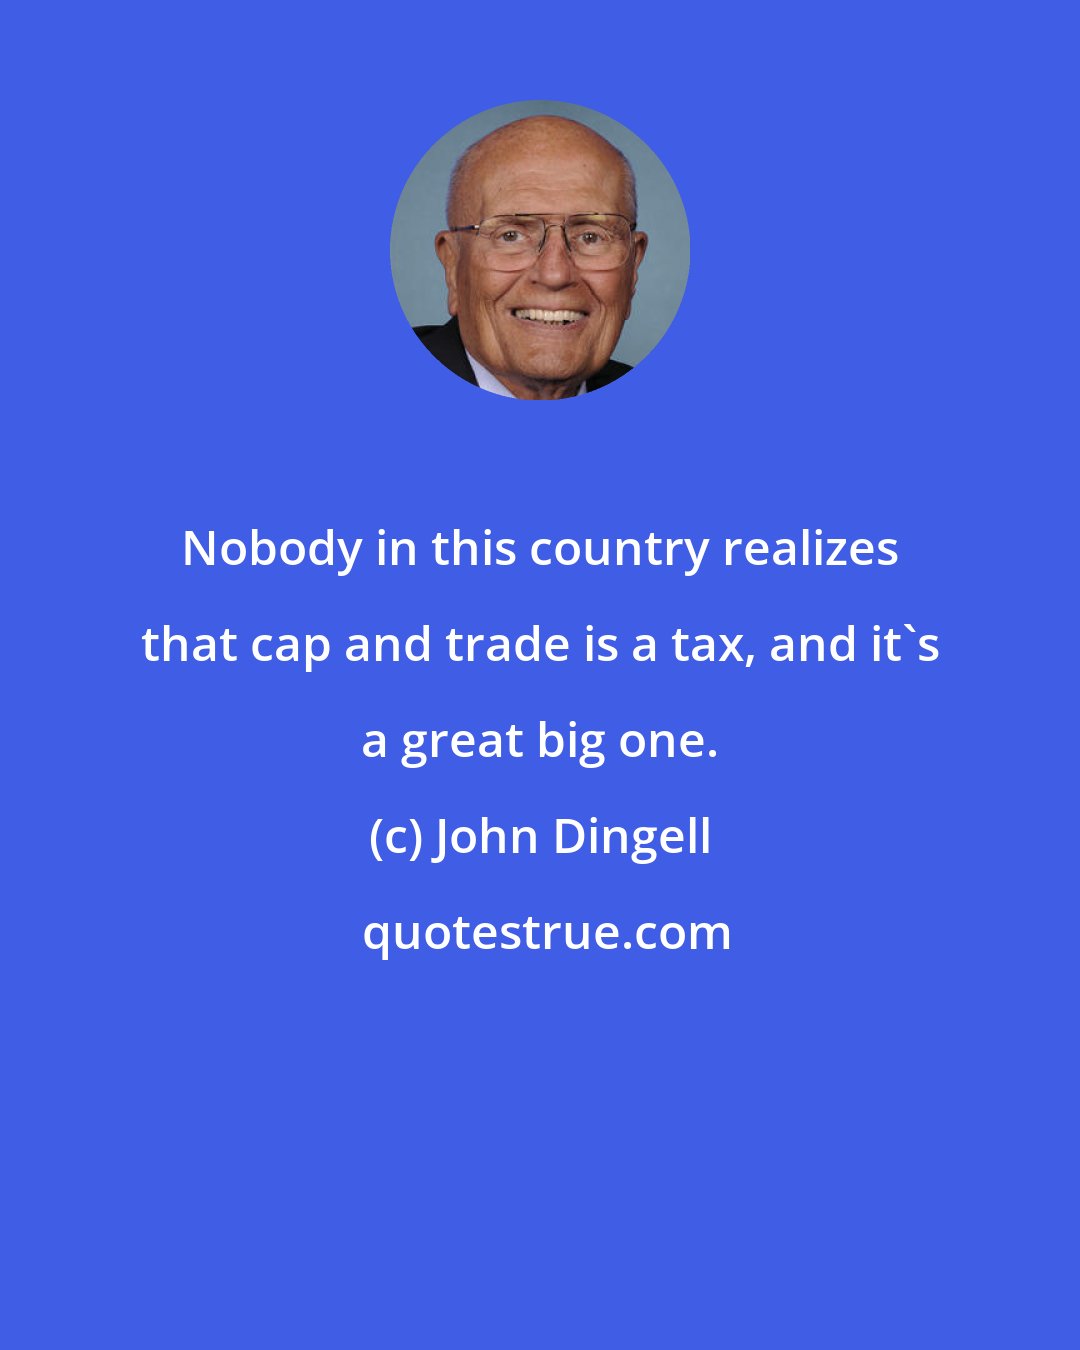 John Dingell: Nobody in this country realizes that cap and trade is a tax, and it's a great big one.